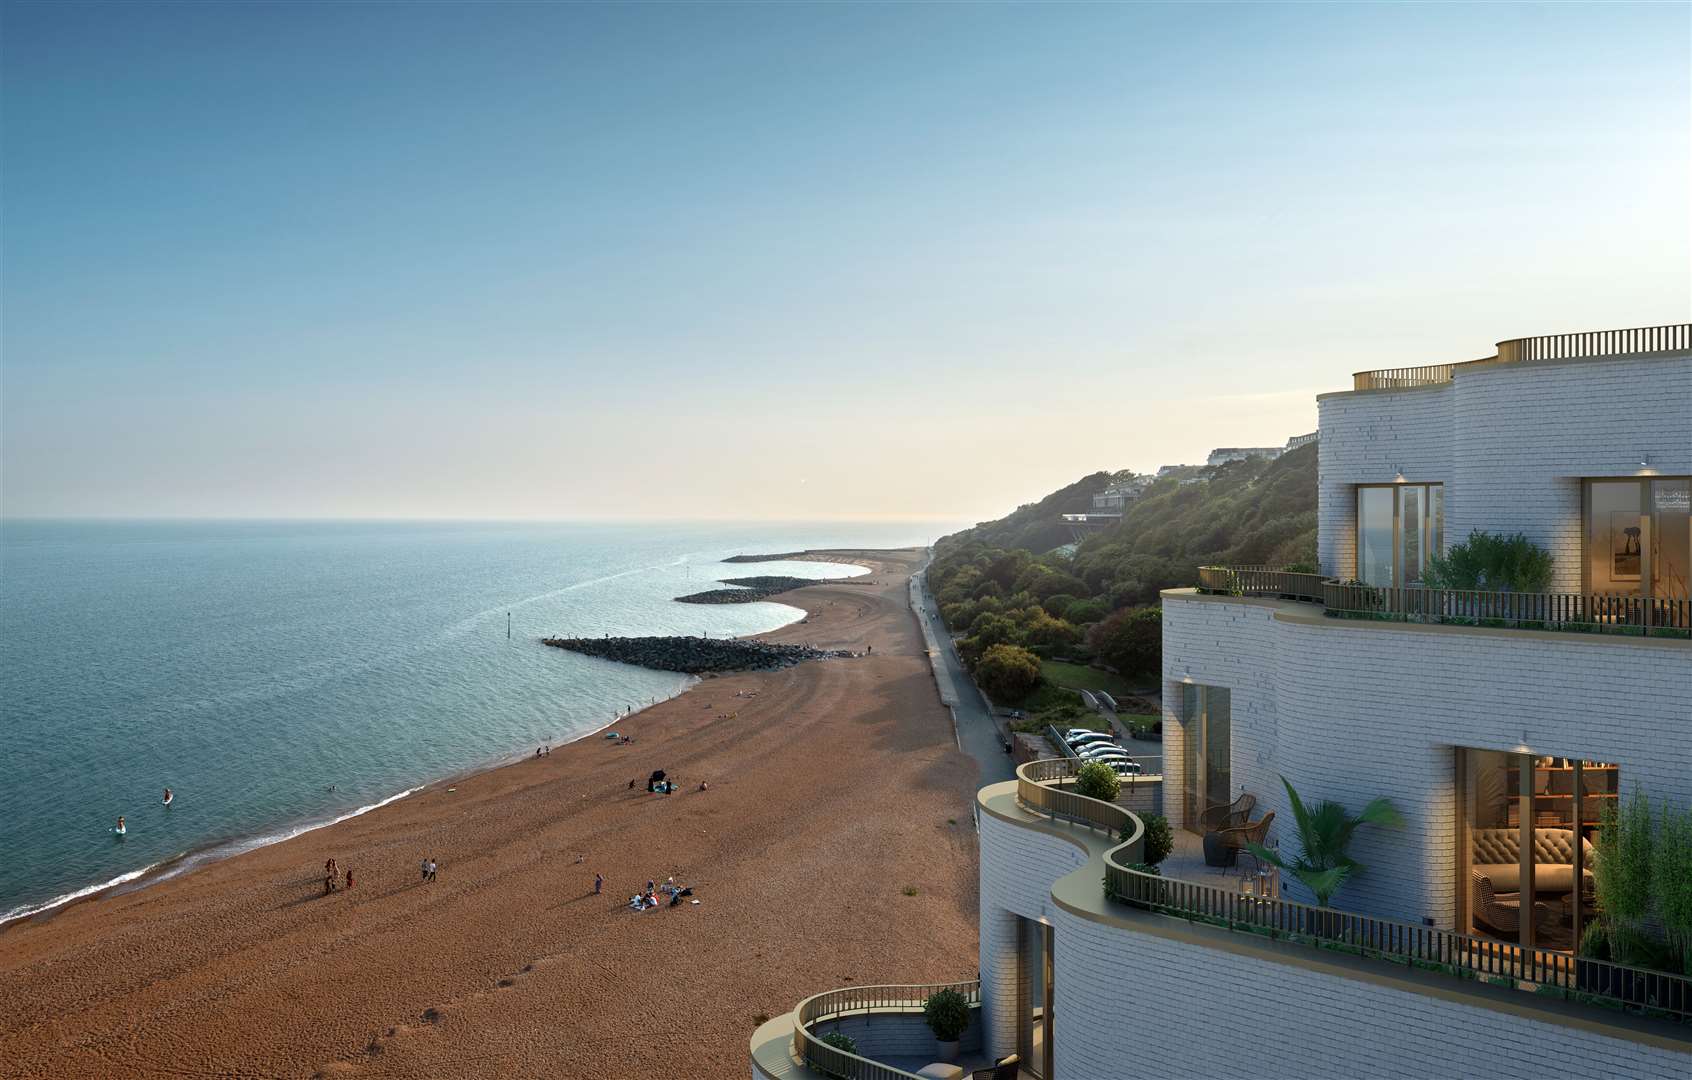 The view from the Shoreline development on Folkestone seafront. Picture: Folkestone Harbour Seafront Development Company